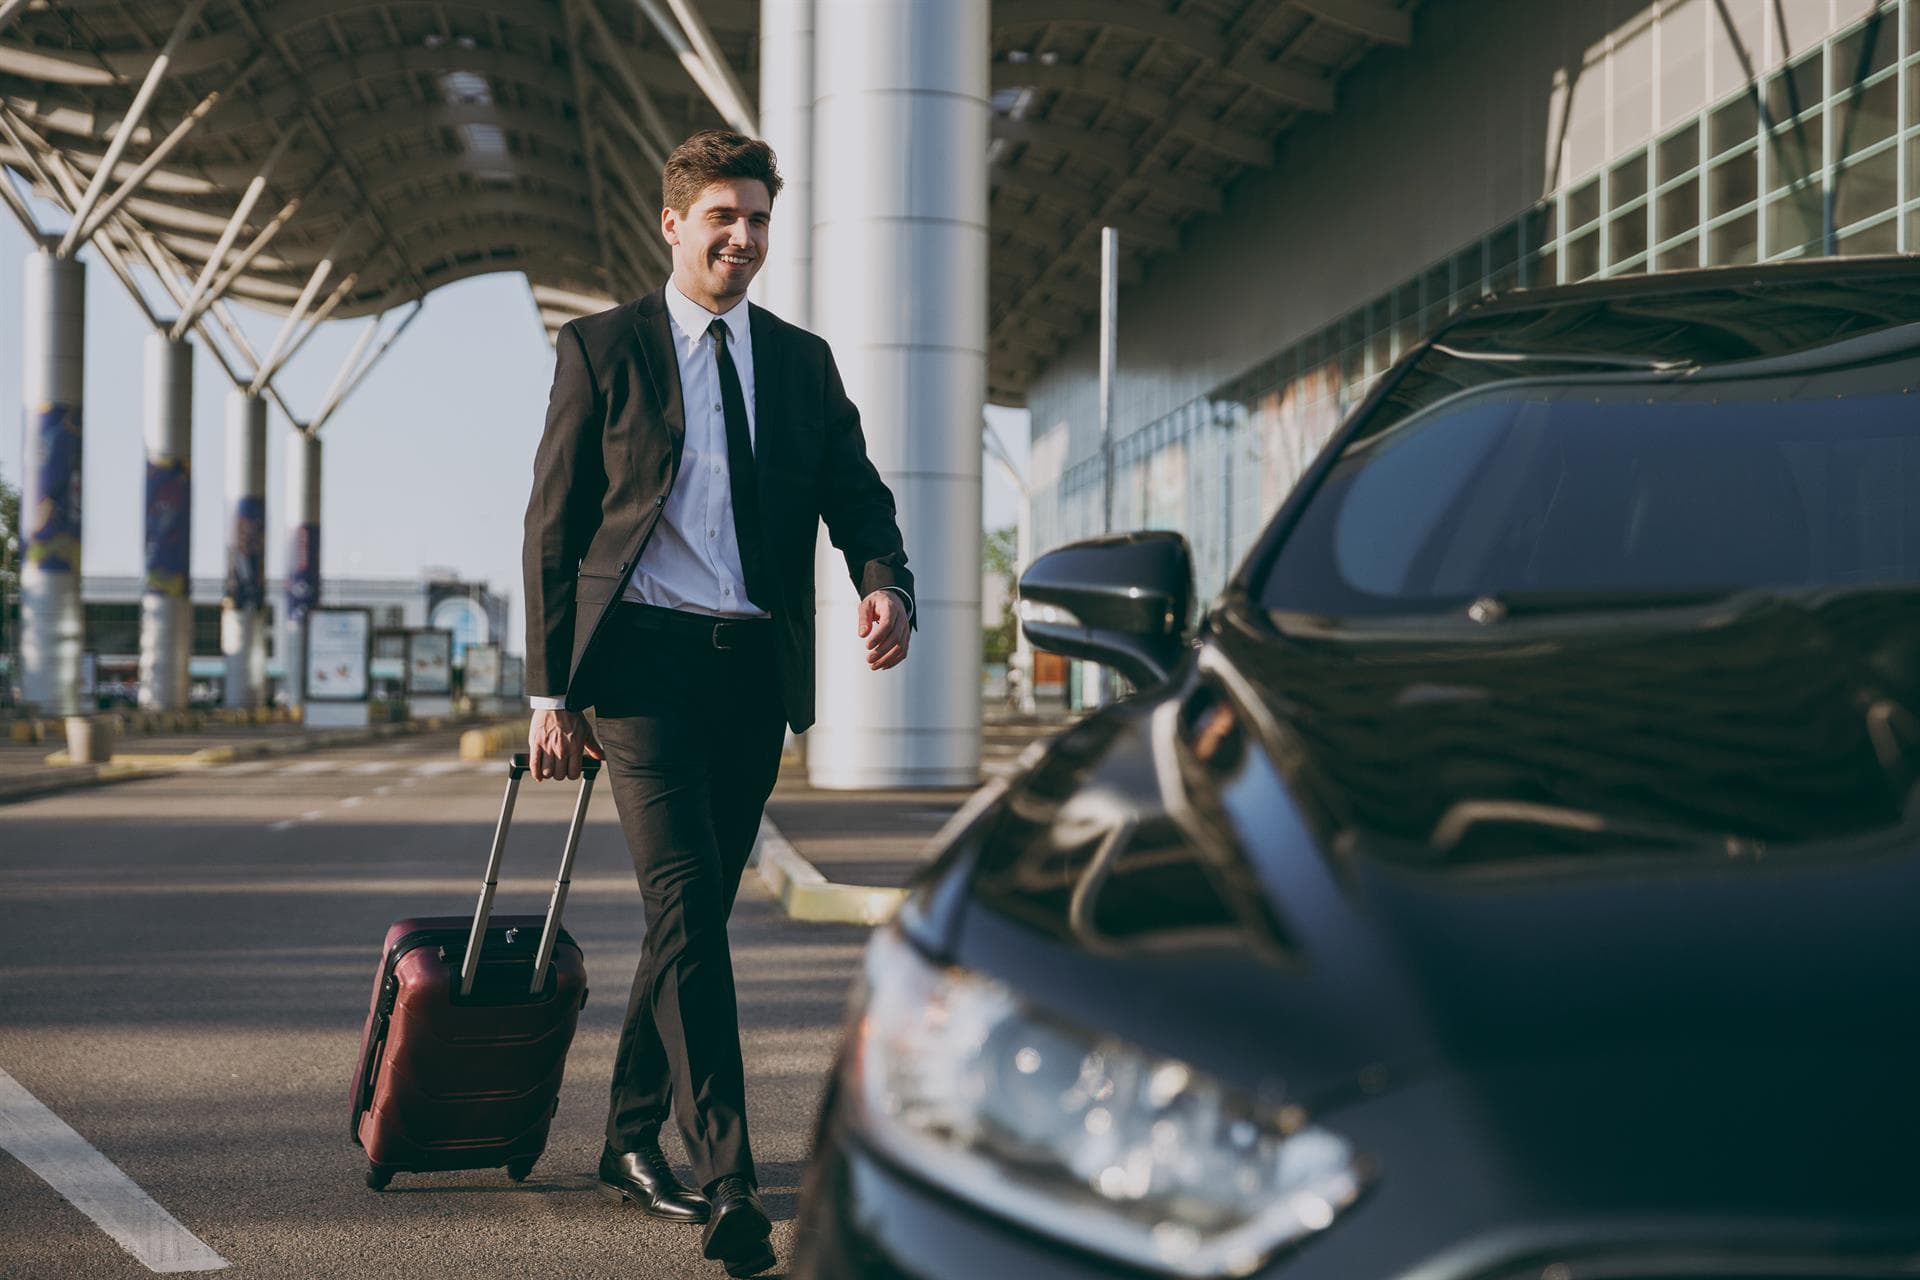  We resolve your doubts about our Alicante airport parking